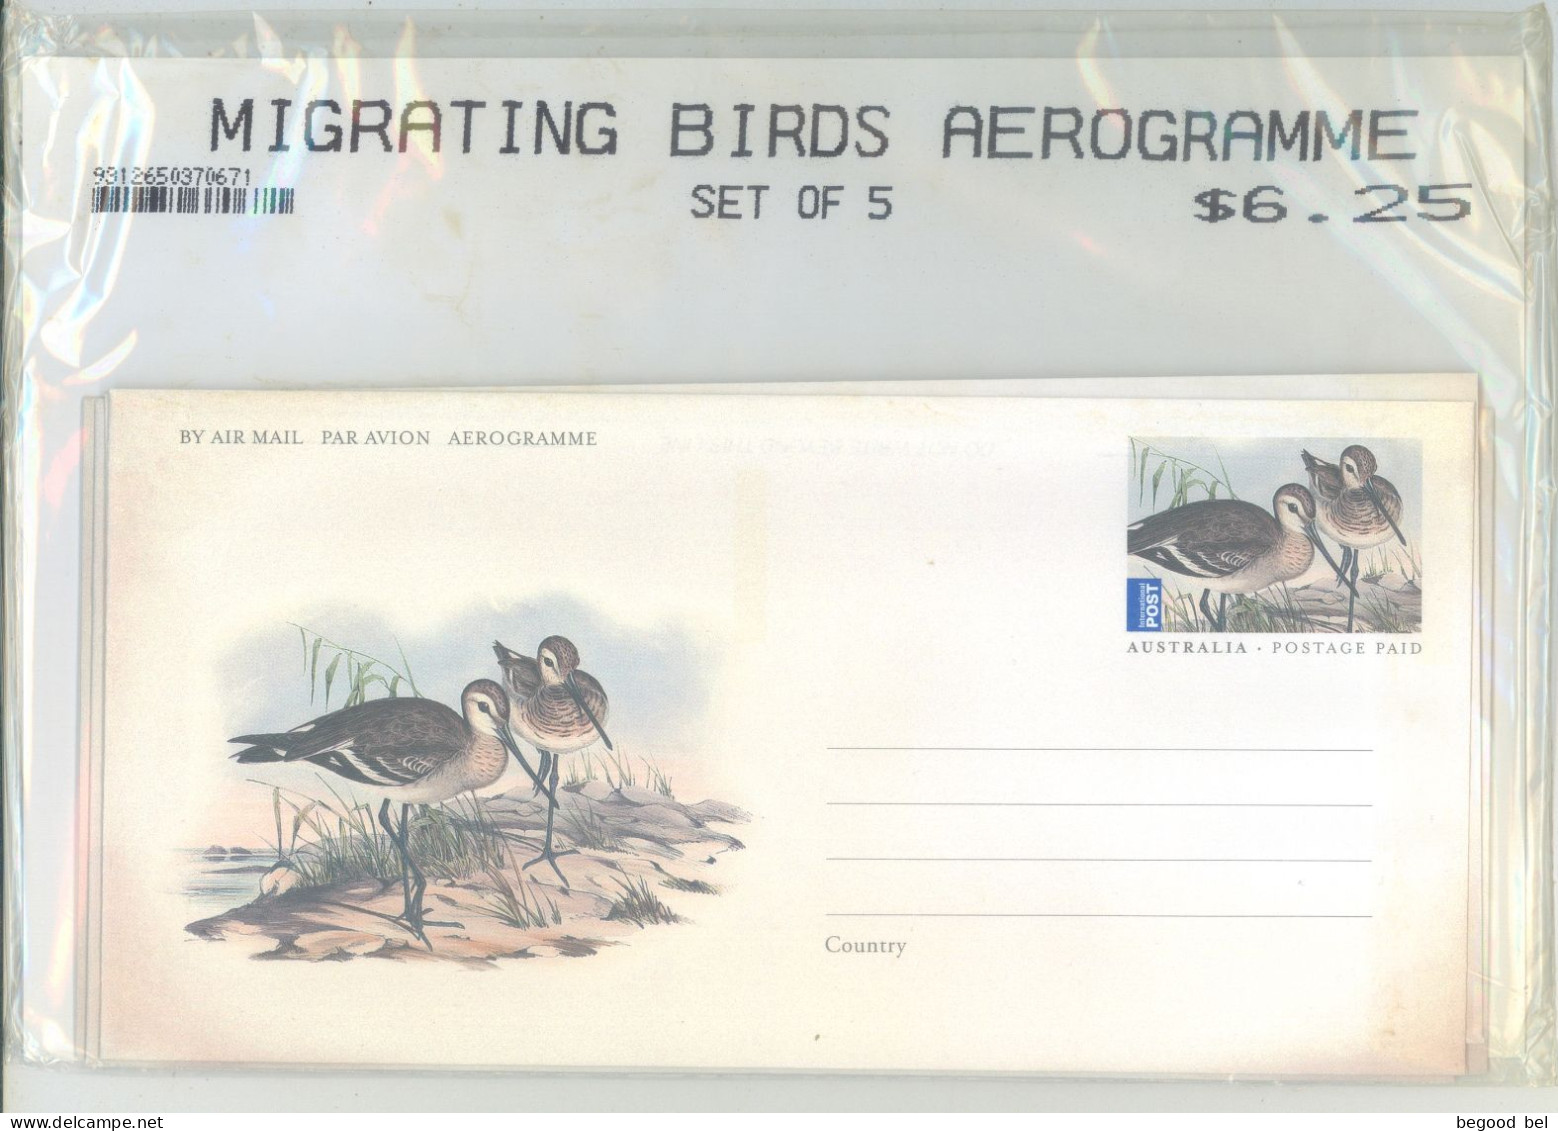 AUSTRALIA - AEROGRAMME COMPLETE SET OF 5 IN THE ORIGINAL ENCLOSED PACKAGING - 2009 - MIGRATING BIRDS -  Lot 25752 - Aérogrammes